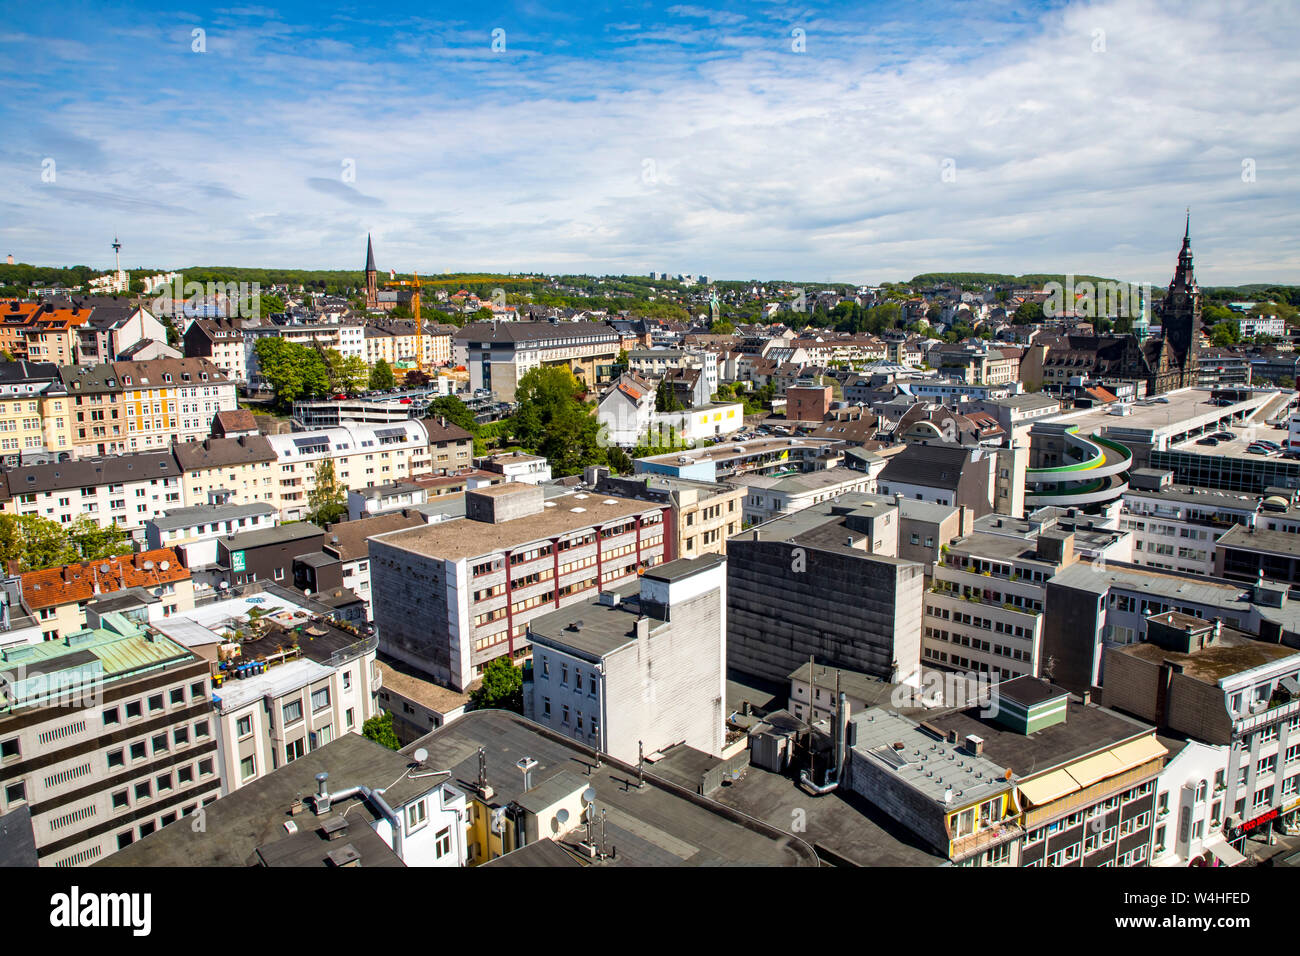 Wuppertal Elberfeld, panoramic view over the northern city centre, Germany Stock Photo